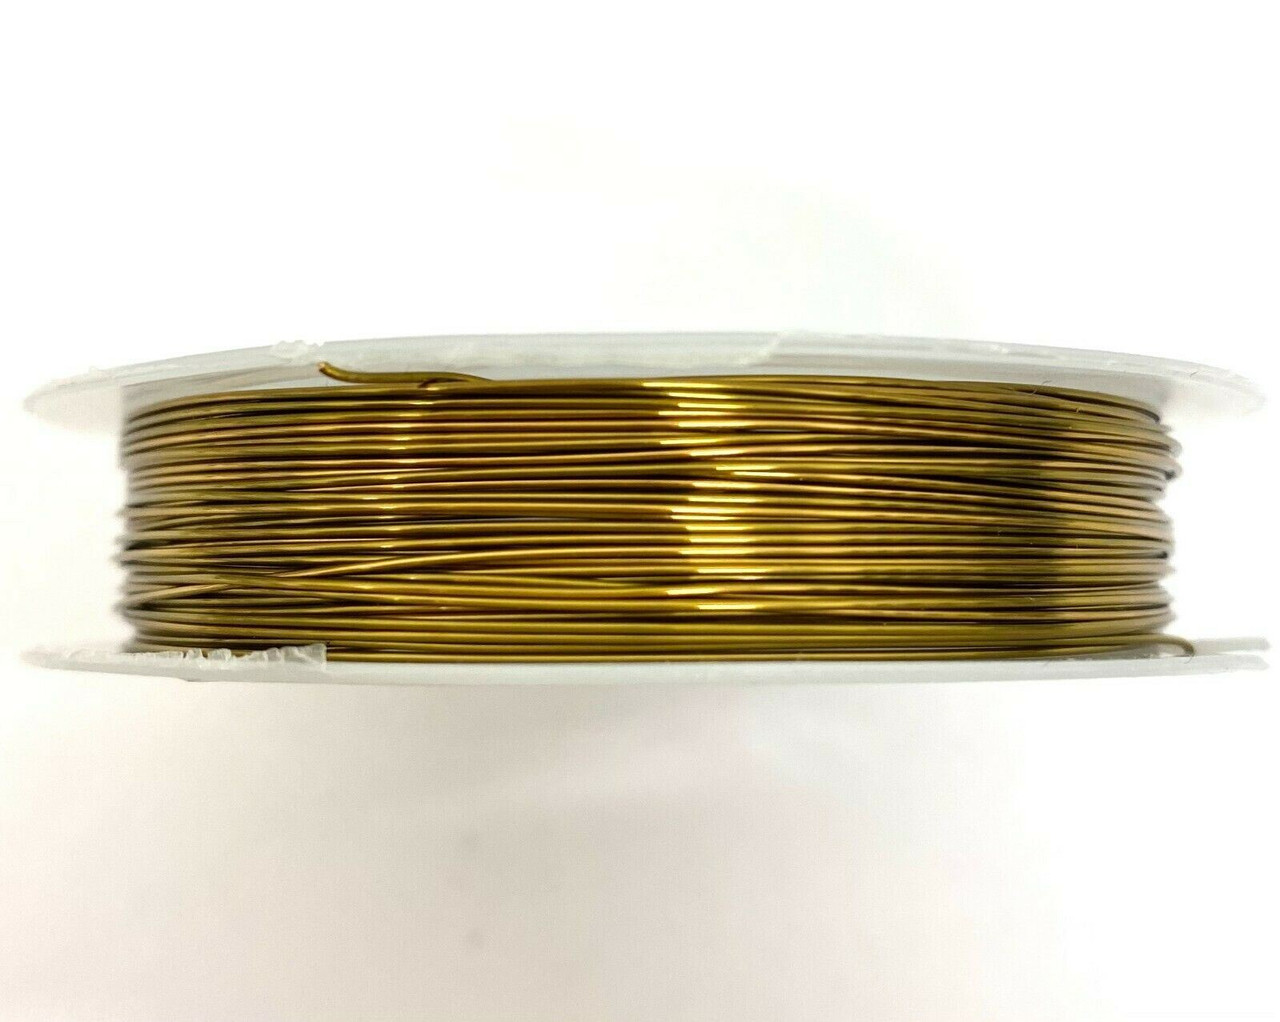 Roll of Copper Wire, 0.4mm thickness, KHAKI colour, approx 10m length